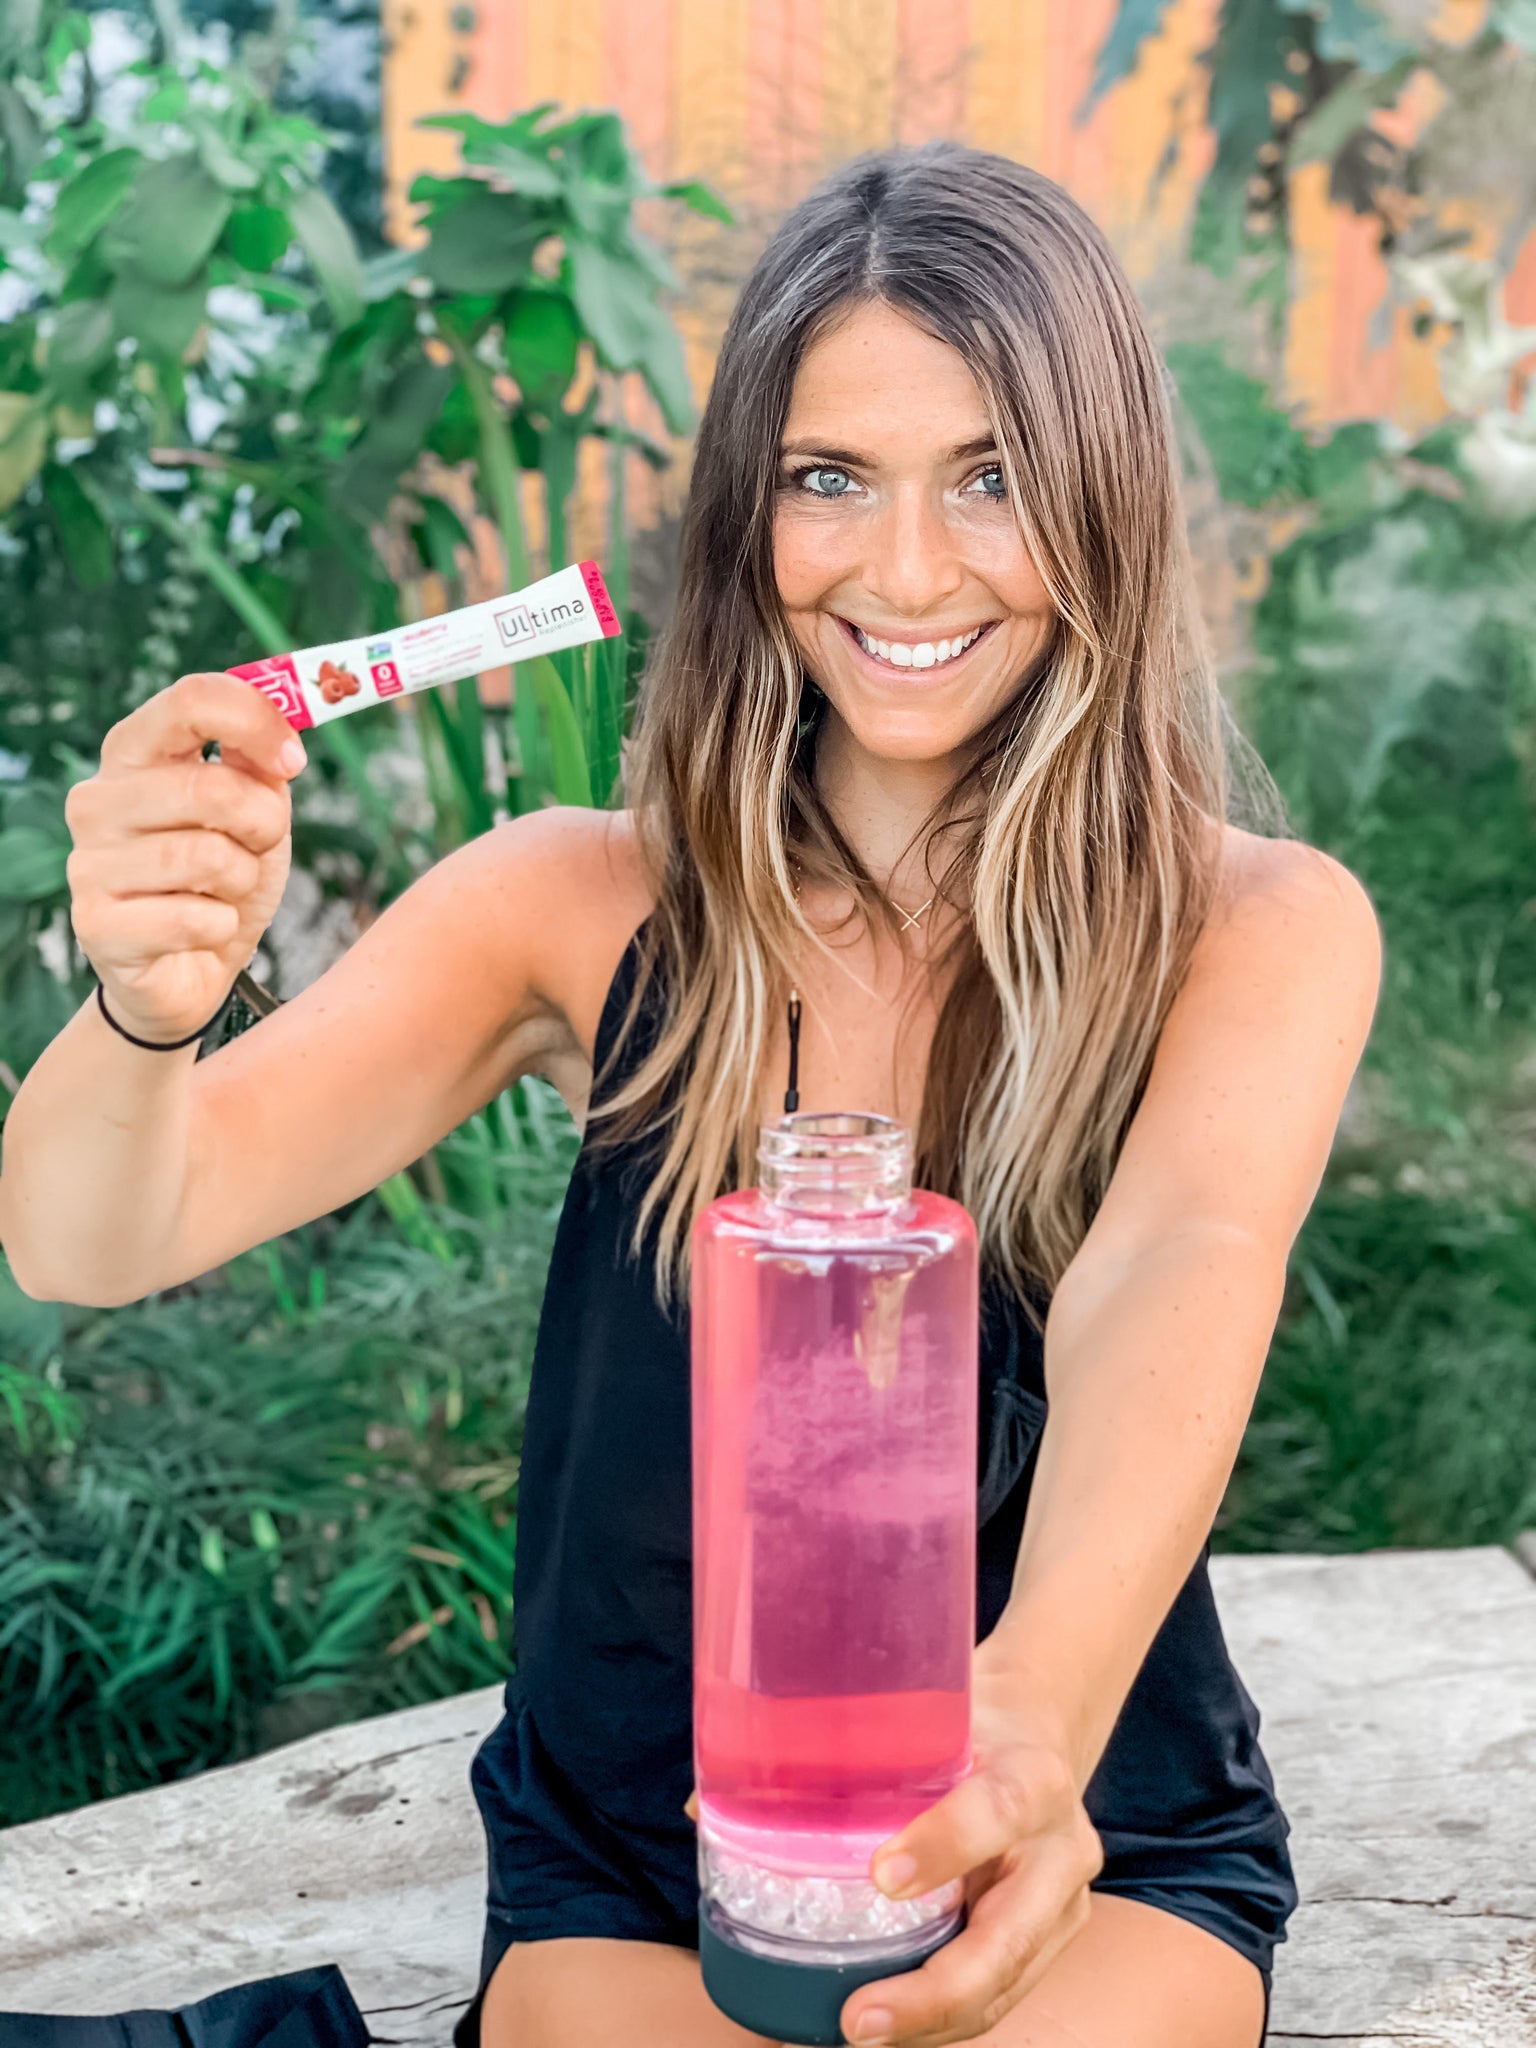 Smiling woman holds a pack of Ultima electrolytes in one hand while holding a water bottle in the other before mixing the two together for healthy hydration.